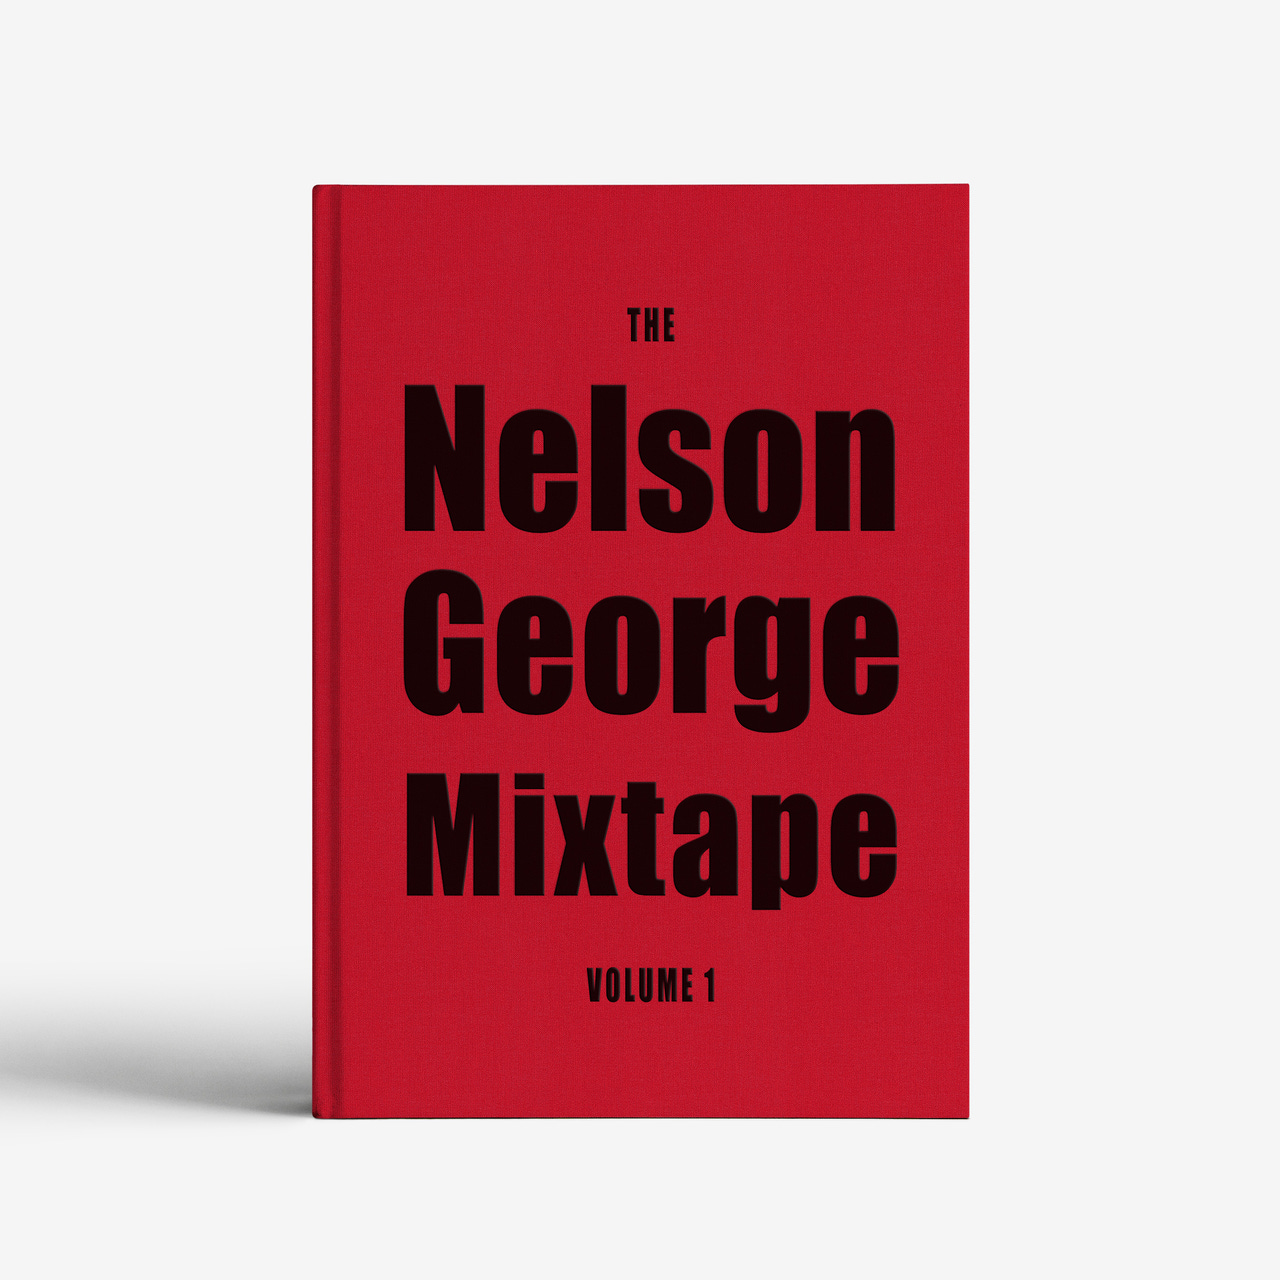 Artwork for The Nelson George Mixtape